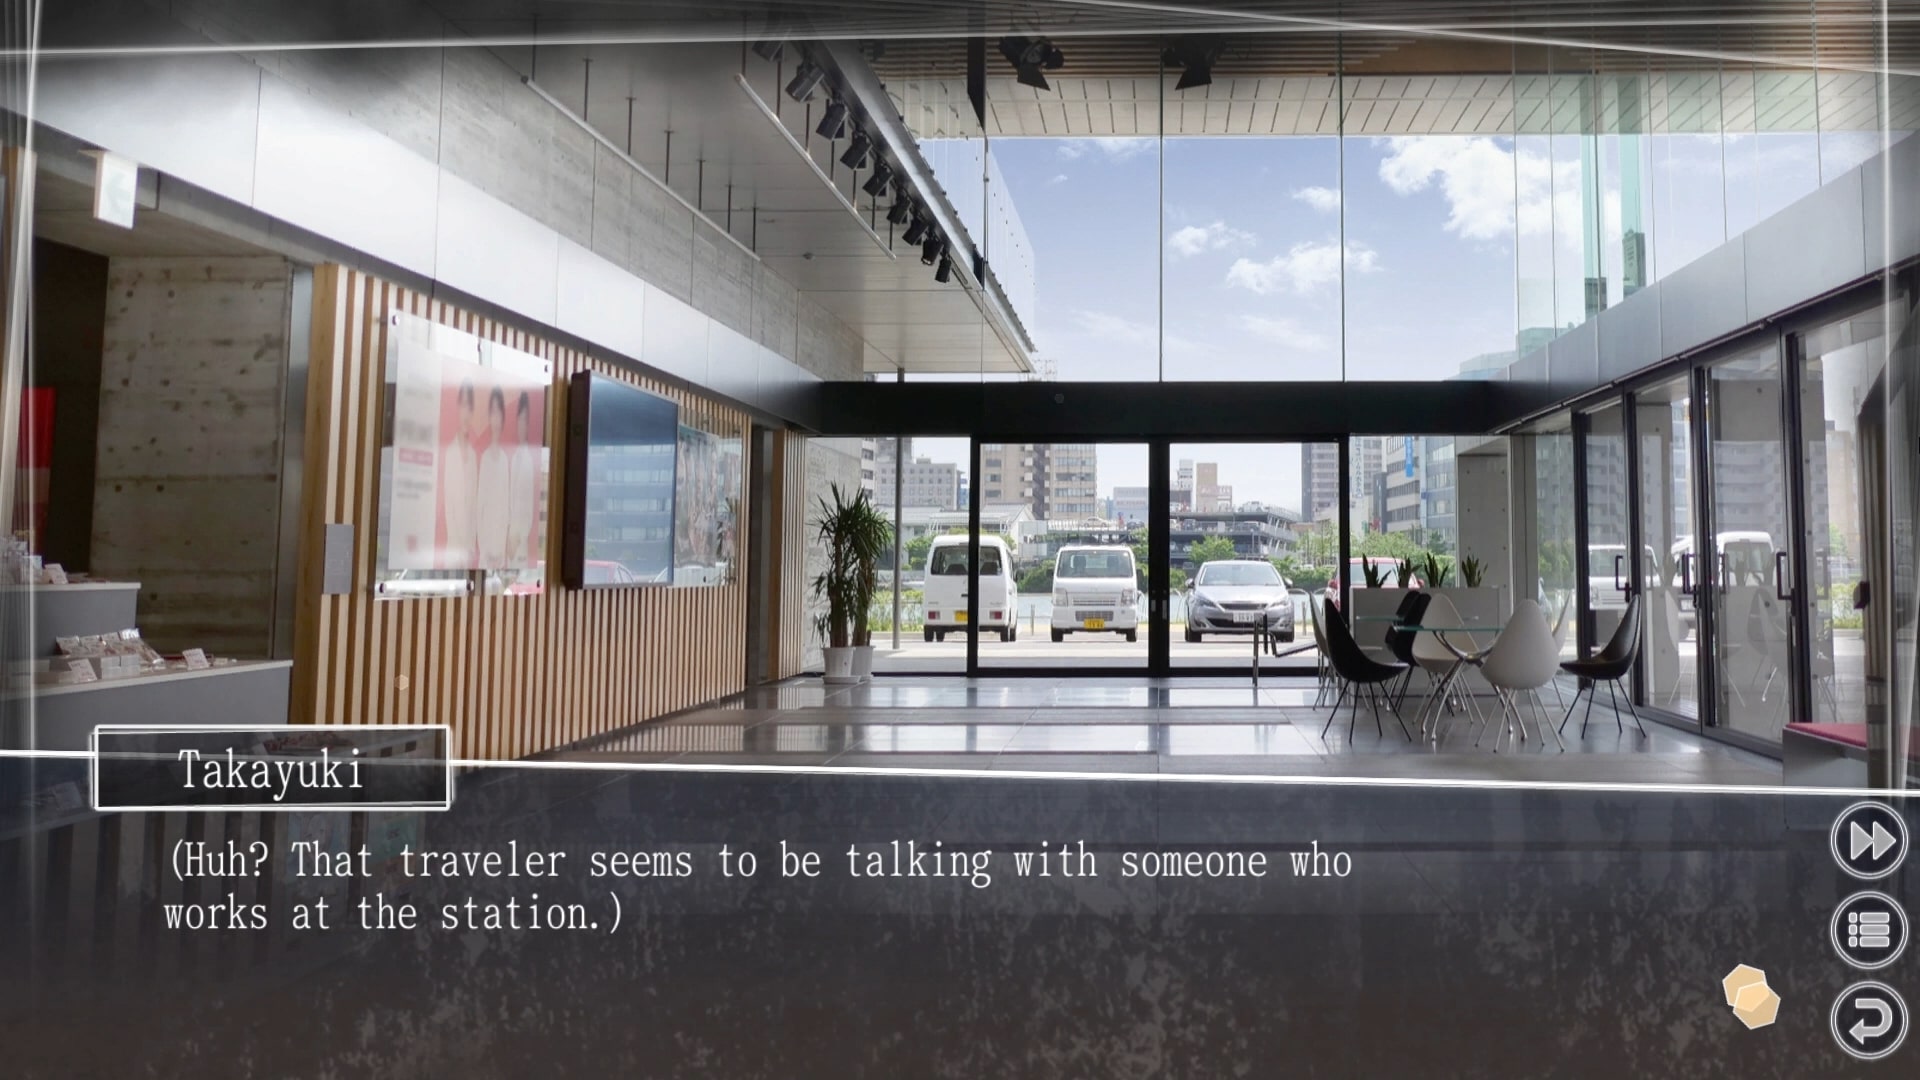 Root Letter Last Answer - Additional Scenarios for Root Letter Last Answer - Scenario 1: Wandering Traveler - 87AB7A6